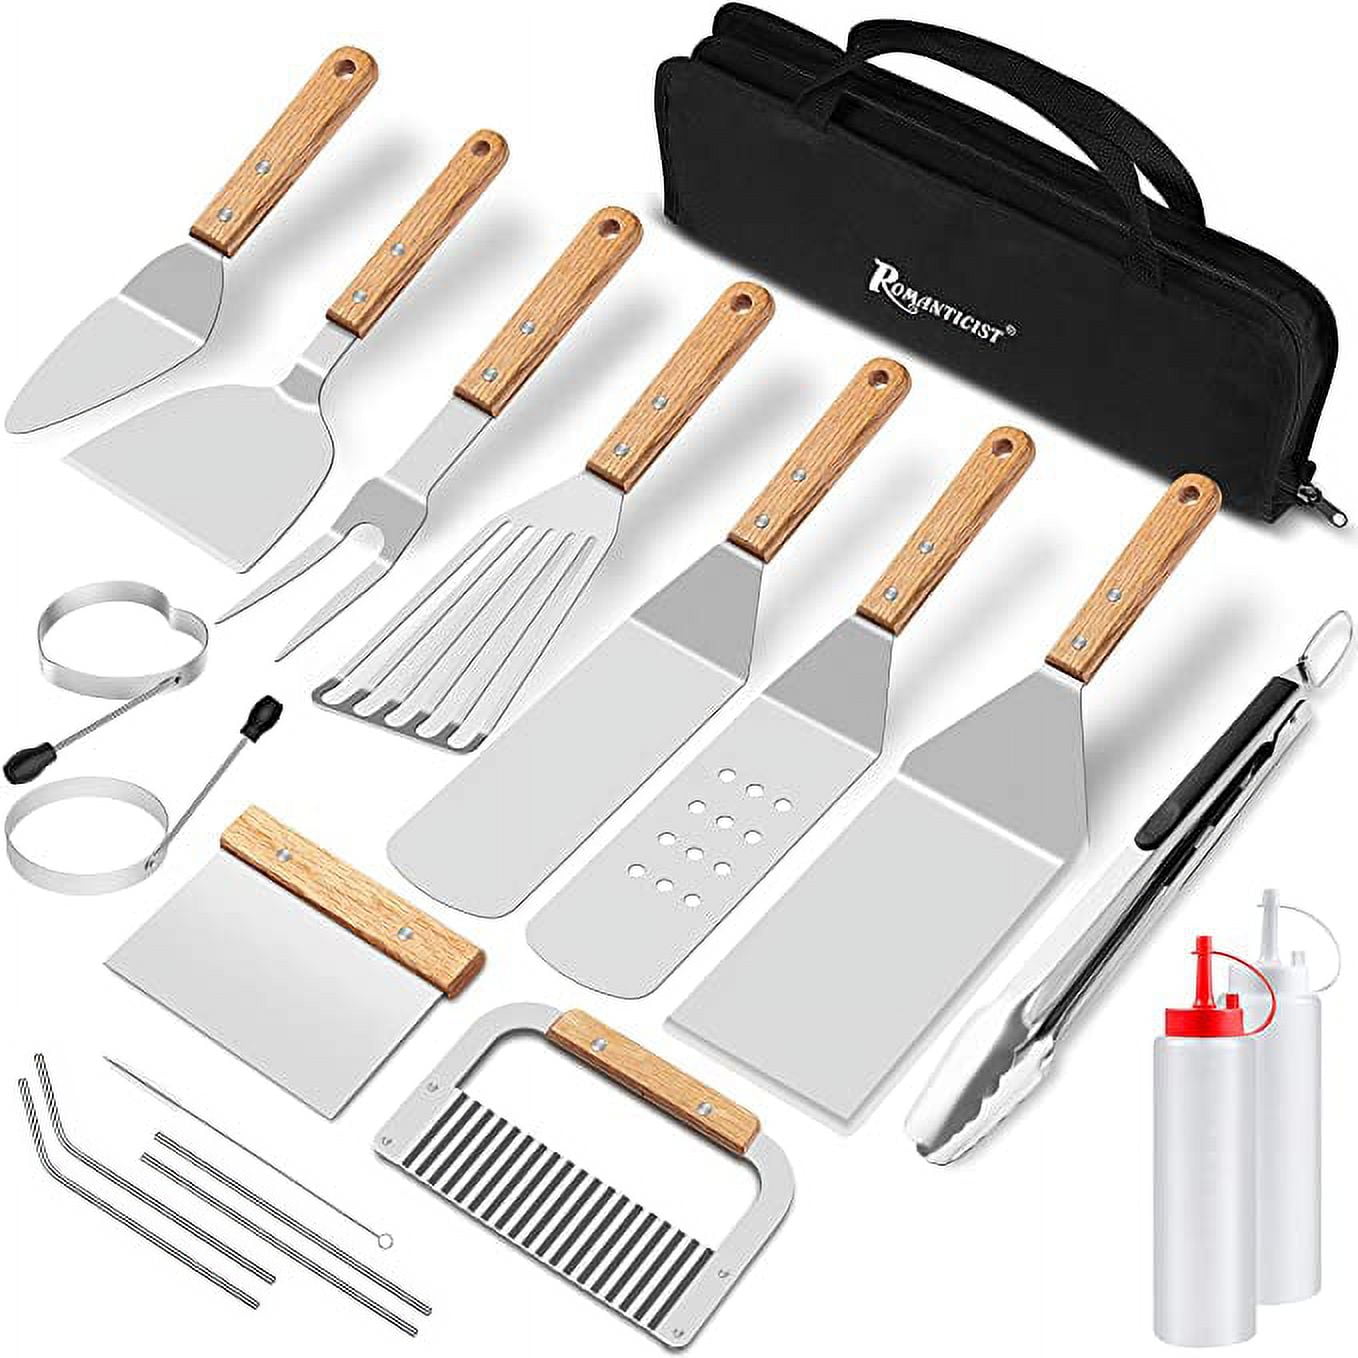 ROMANTICIST 20pcs BBQ Griddle Accessories Cooking Kit, Heavy Duty Wooden  Handle Grill Utensils Tool Set, Stainless Steel Spatula, Tongs, Scraper for  Flat Top, Teppanyaki, Hibachi, Camping, Tailgating